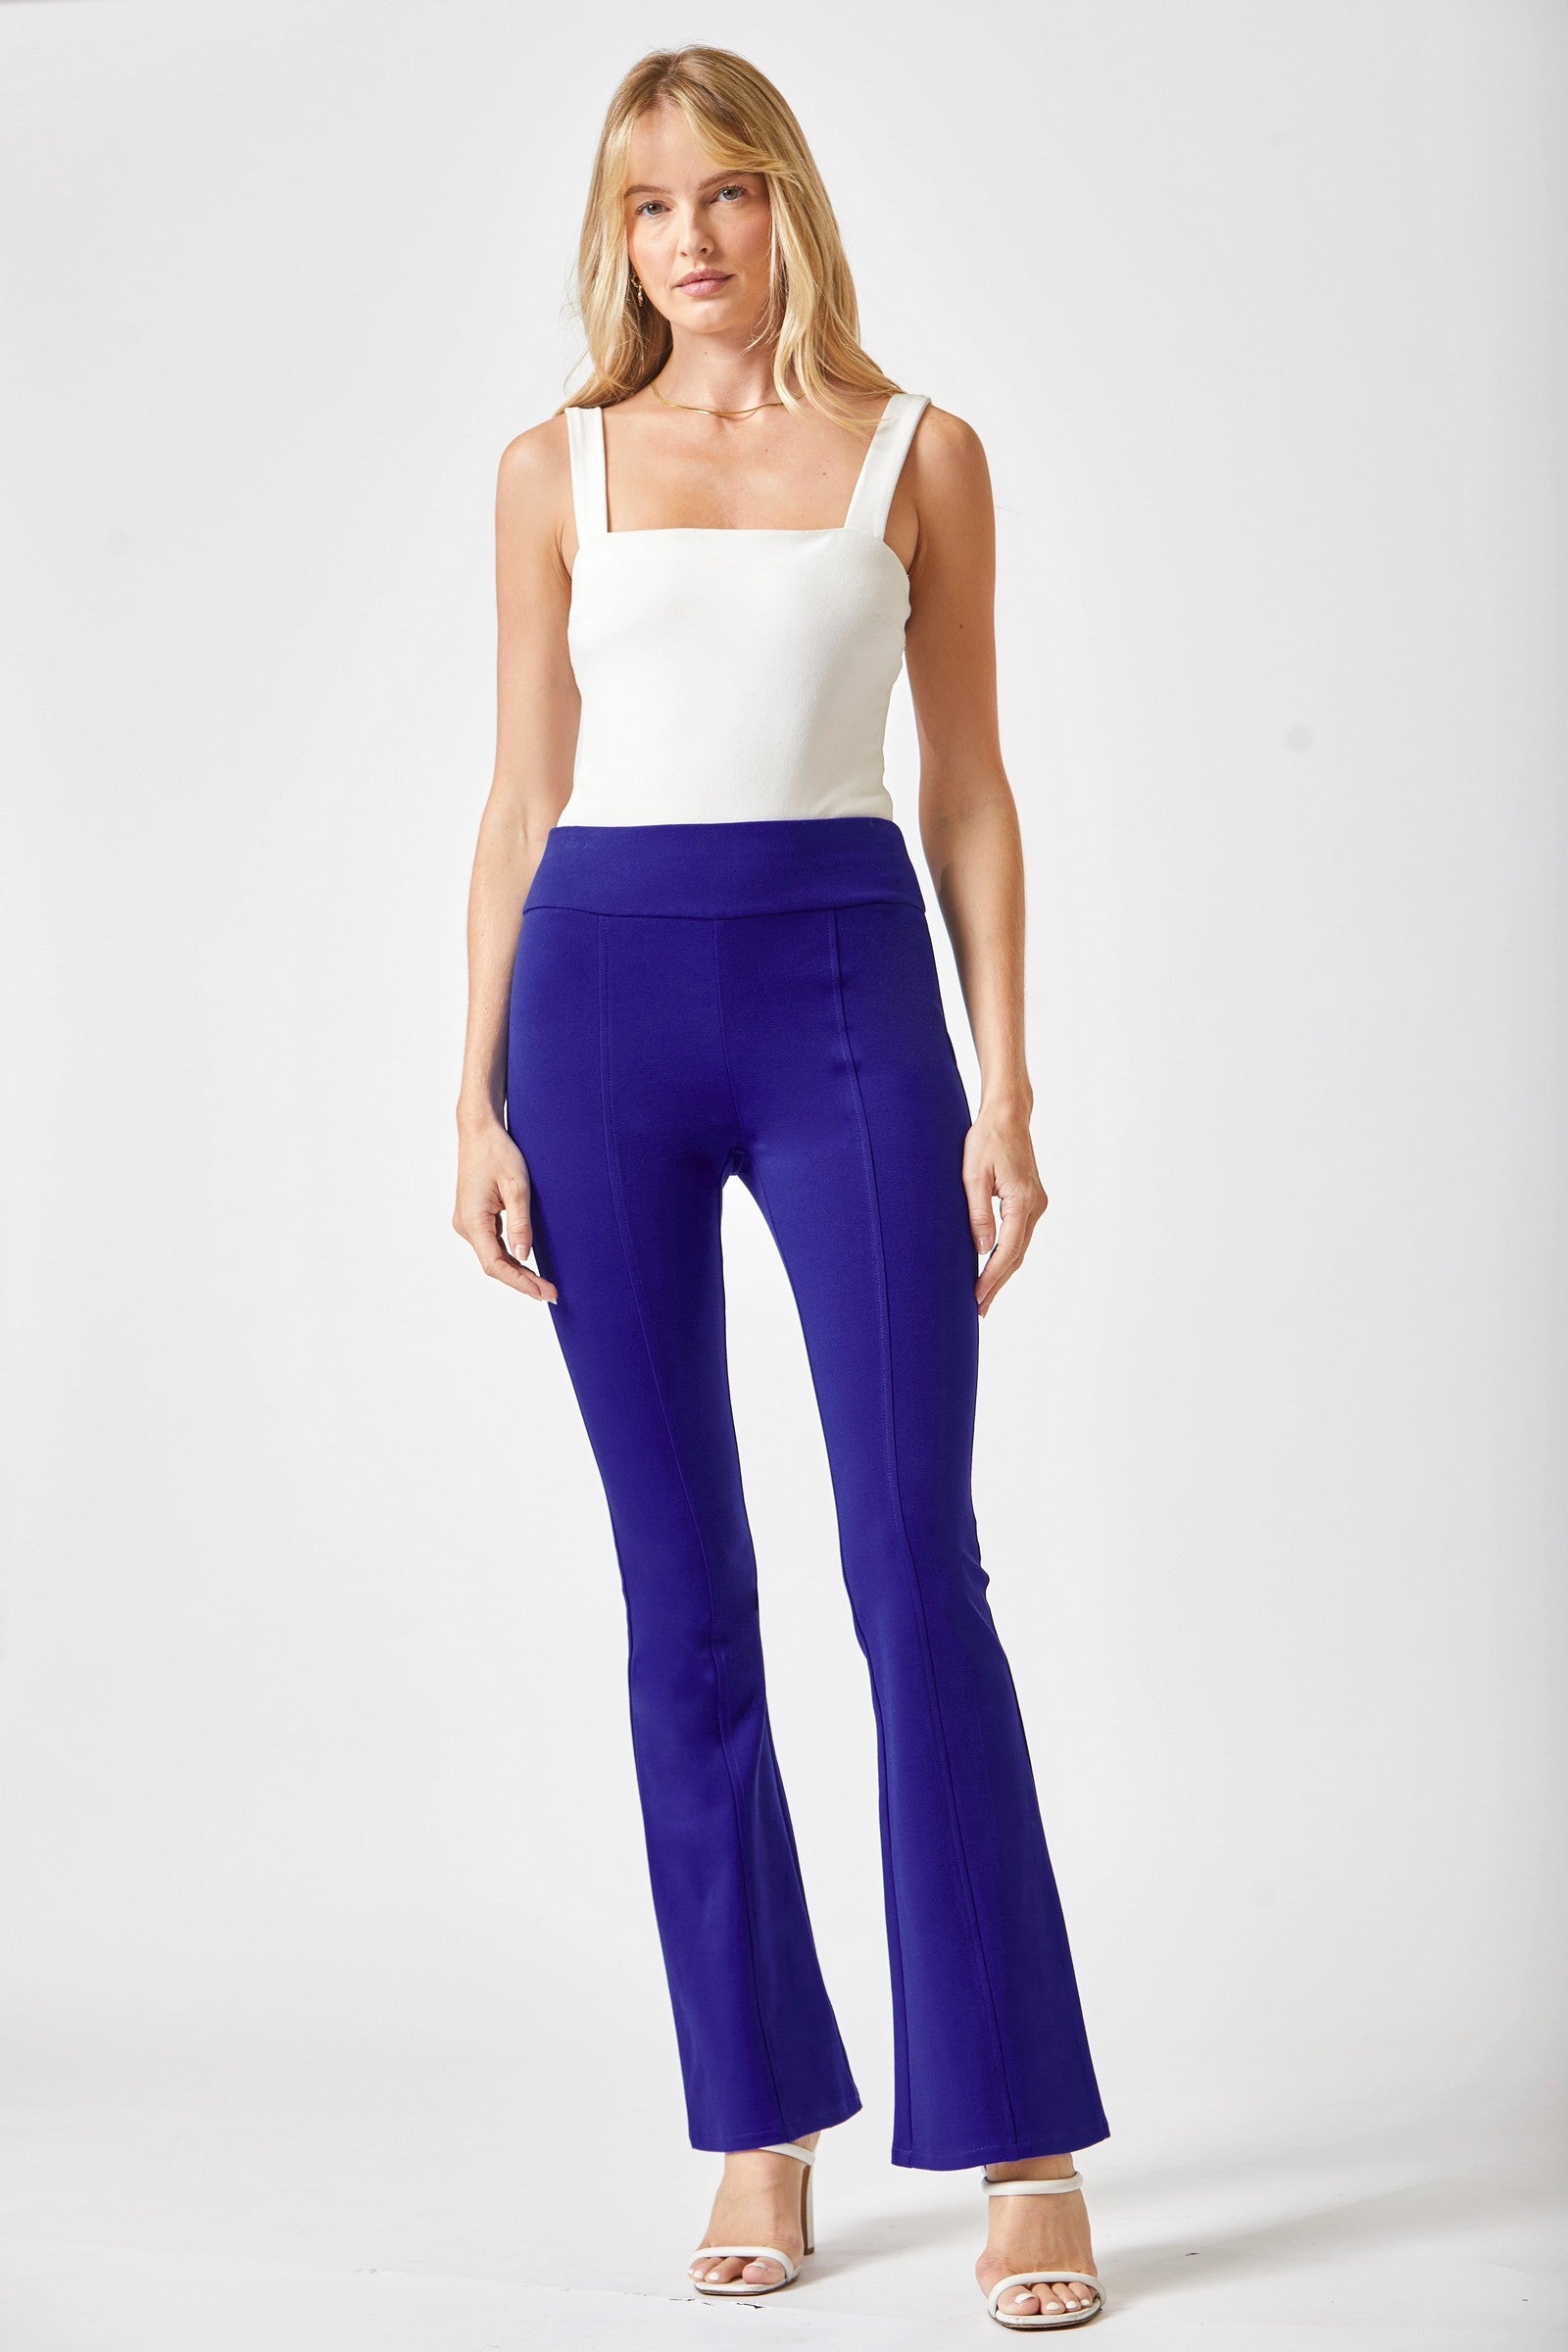 Dear Scarlett Magic Flare Pants in Eleven Colors Final Sale French Royal Ave Shops